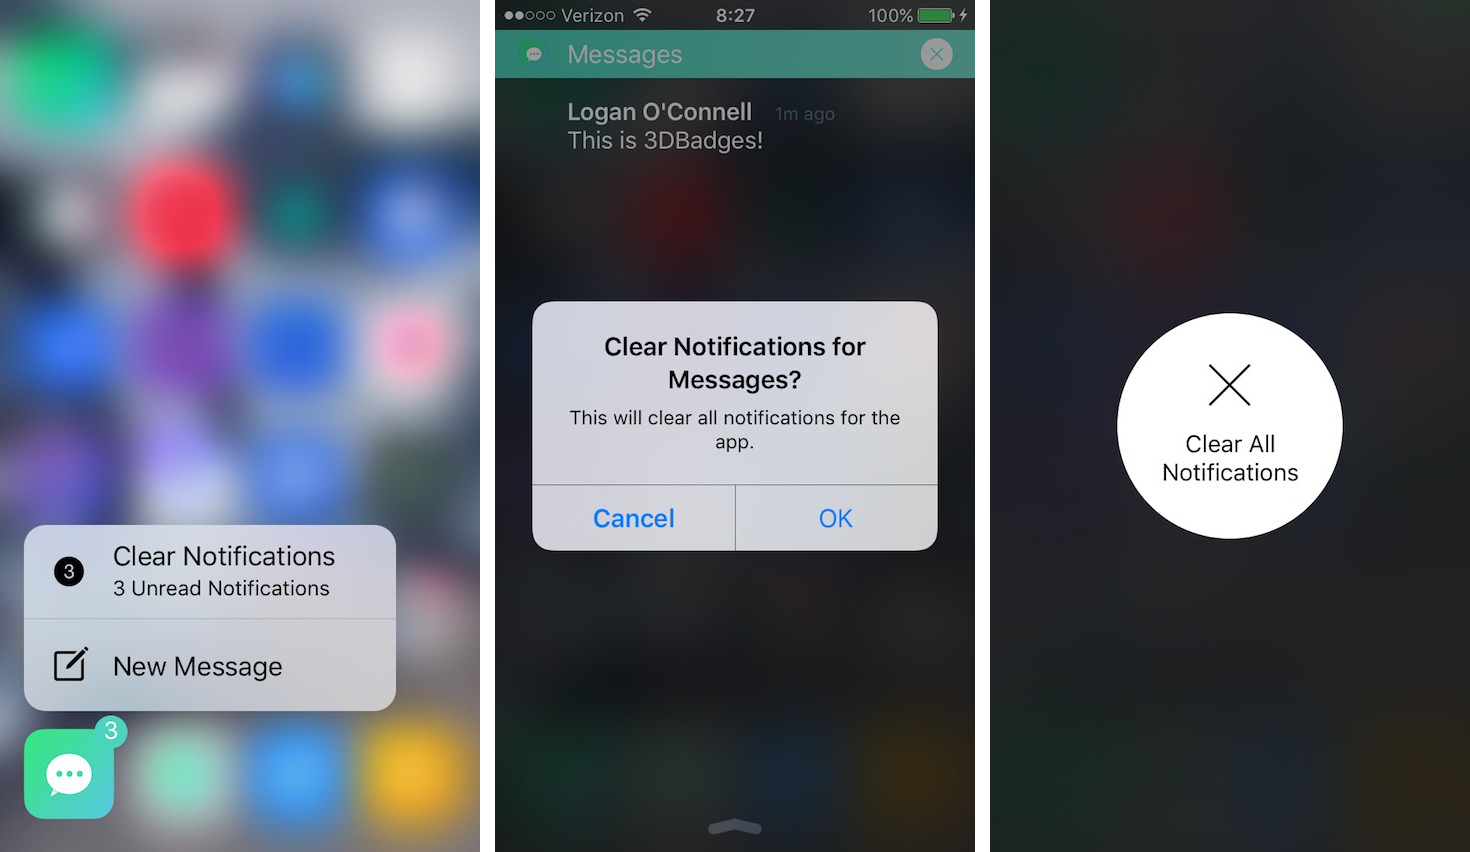 easyclear notification clearer via 3D Touch examples